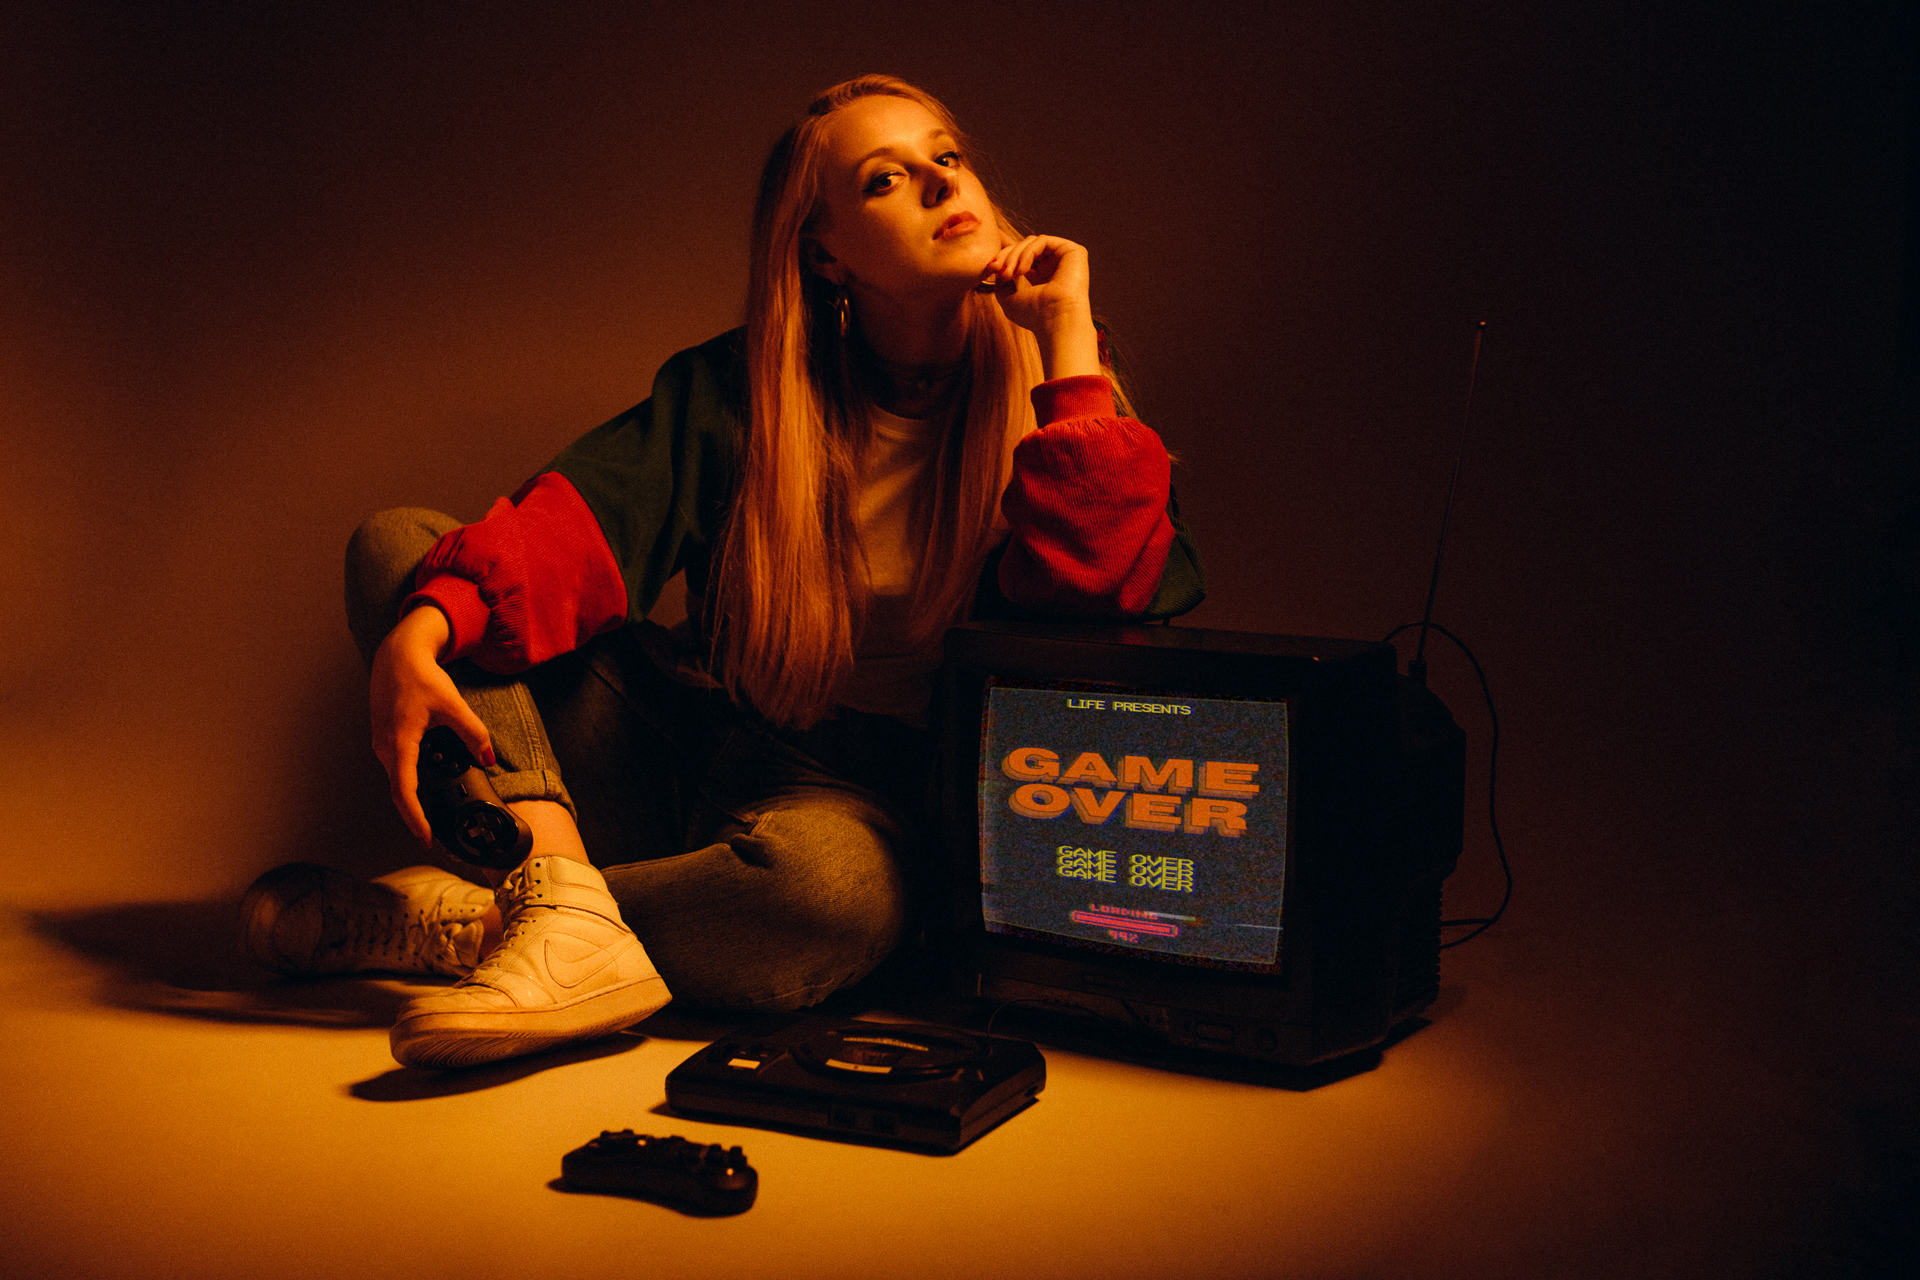 REBEKAH FITCH releases new single ‘Game Over’ - Listen Now! 